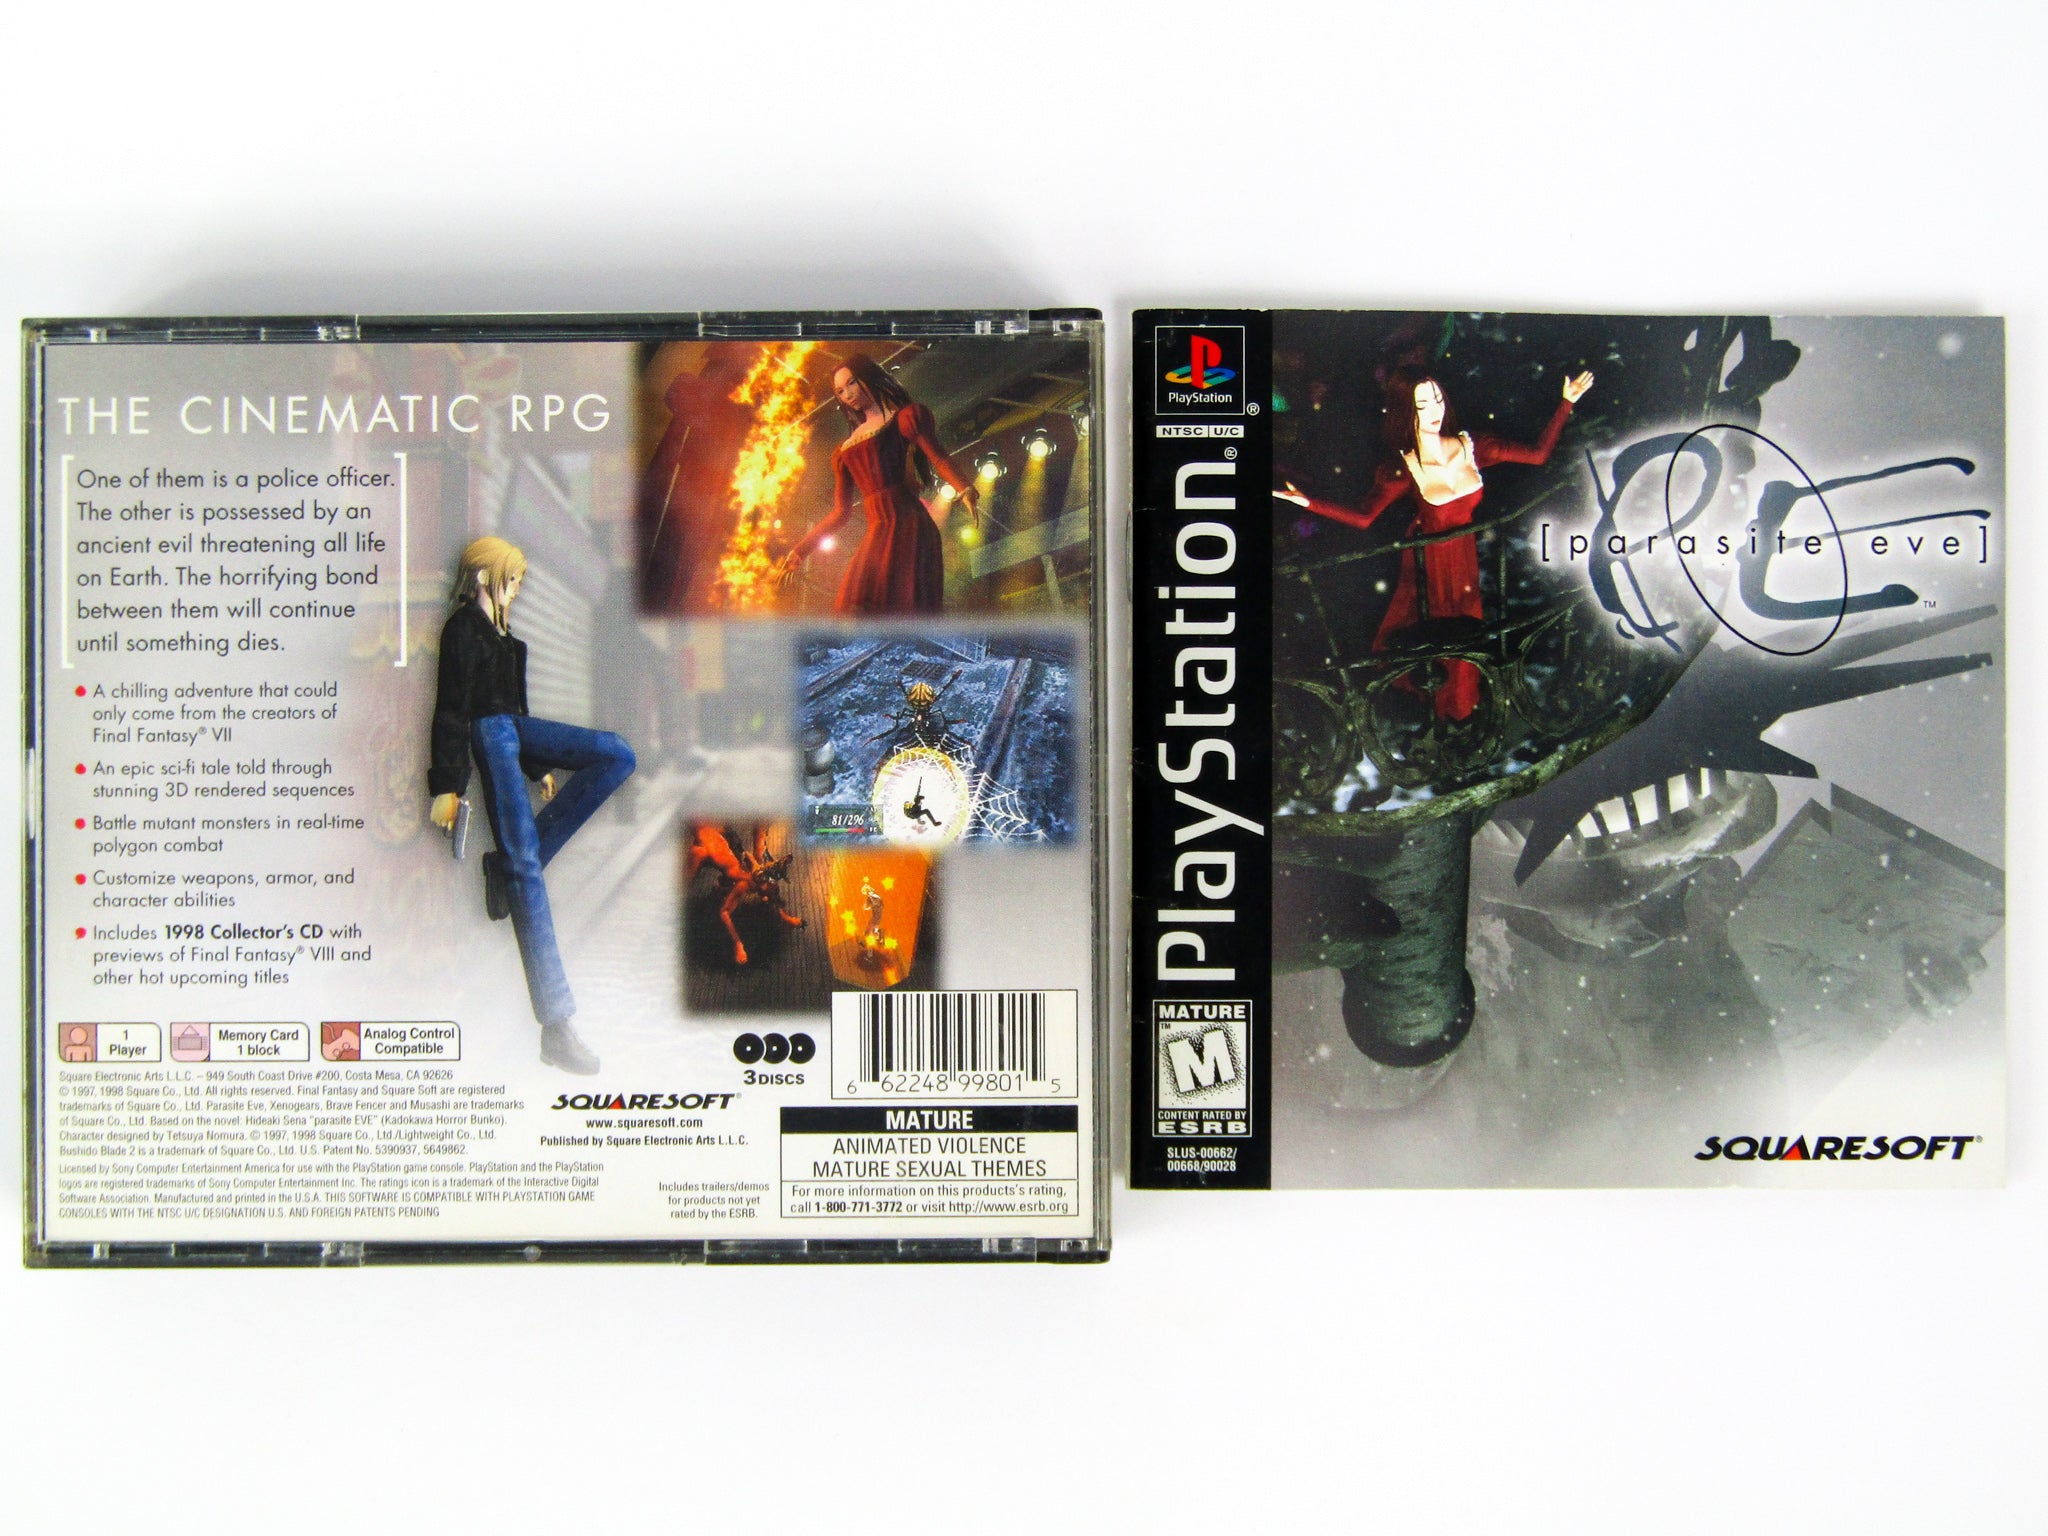 Rare Ps1 Playstation 1 Parasite Eve Video Game Complete